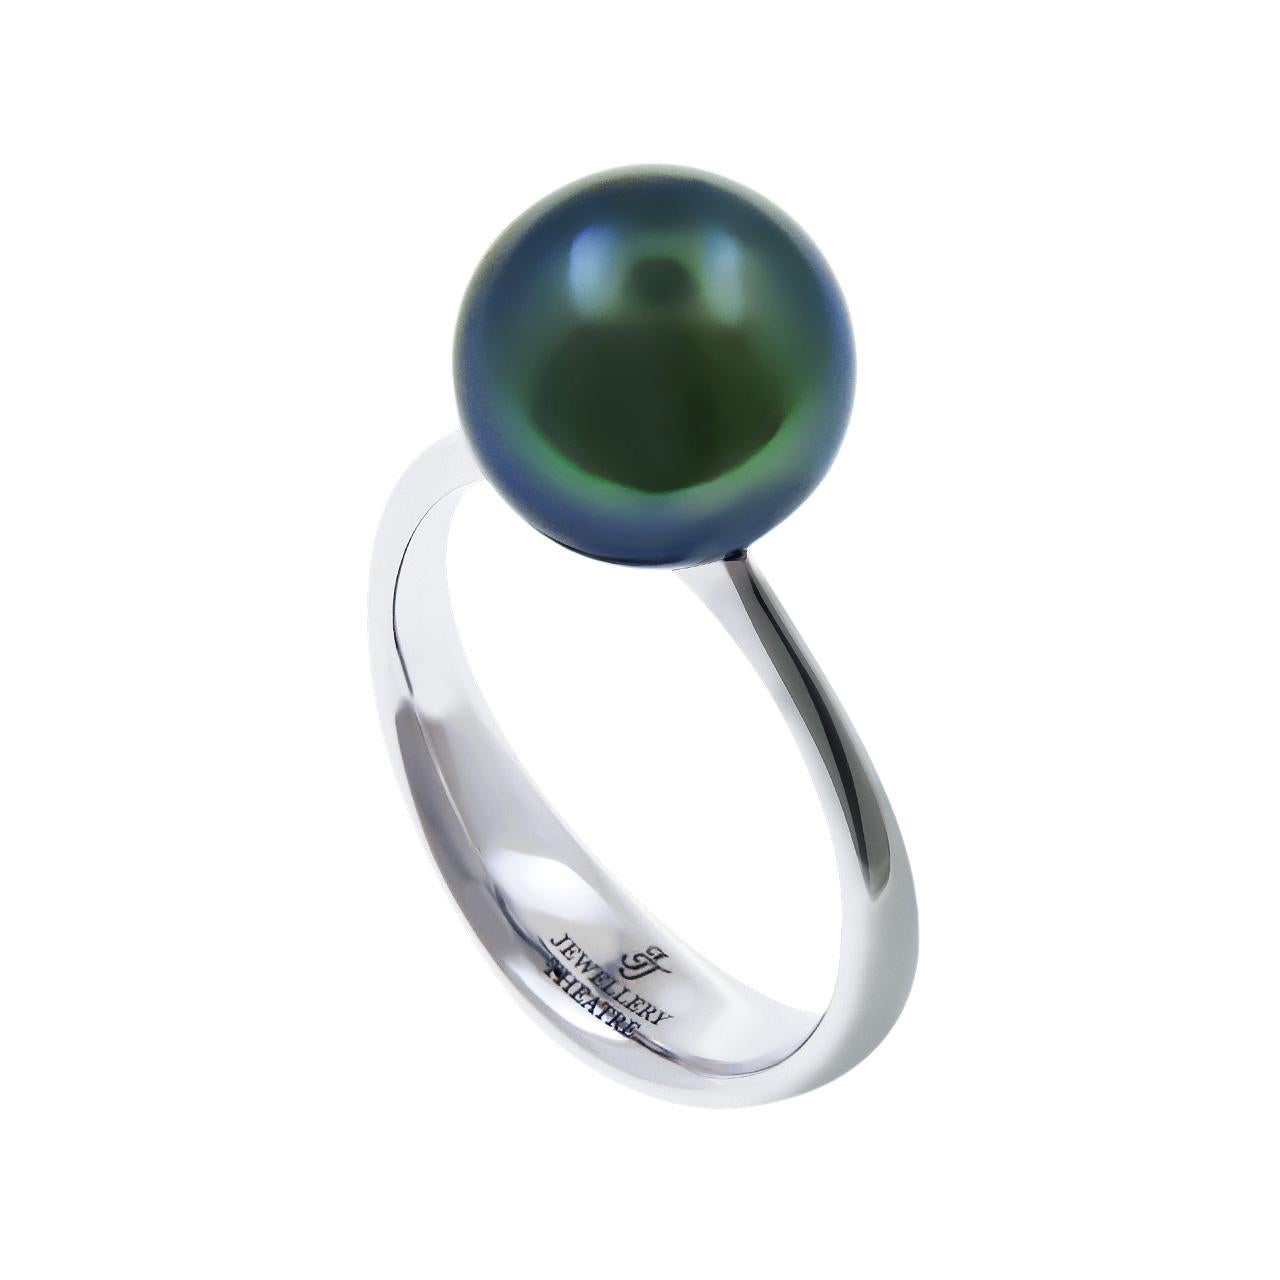 - 1 Round Diamond - 0.01 ct, G/VVS1
- 9.5-10 mm Dark Tahitian pearl
- 18K White Gold 
- Weight: 4.24 g
- Size: 16.5 mm
This elegant ring by Jewellery Theatre features a lustrous dark Tahitian Pearl with a diameter of 9.5-10 millimetres. Ring has a